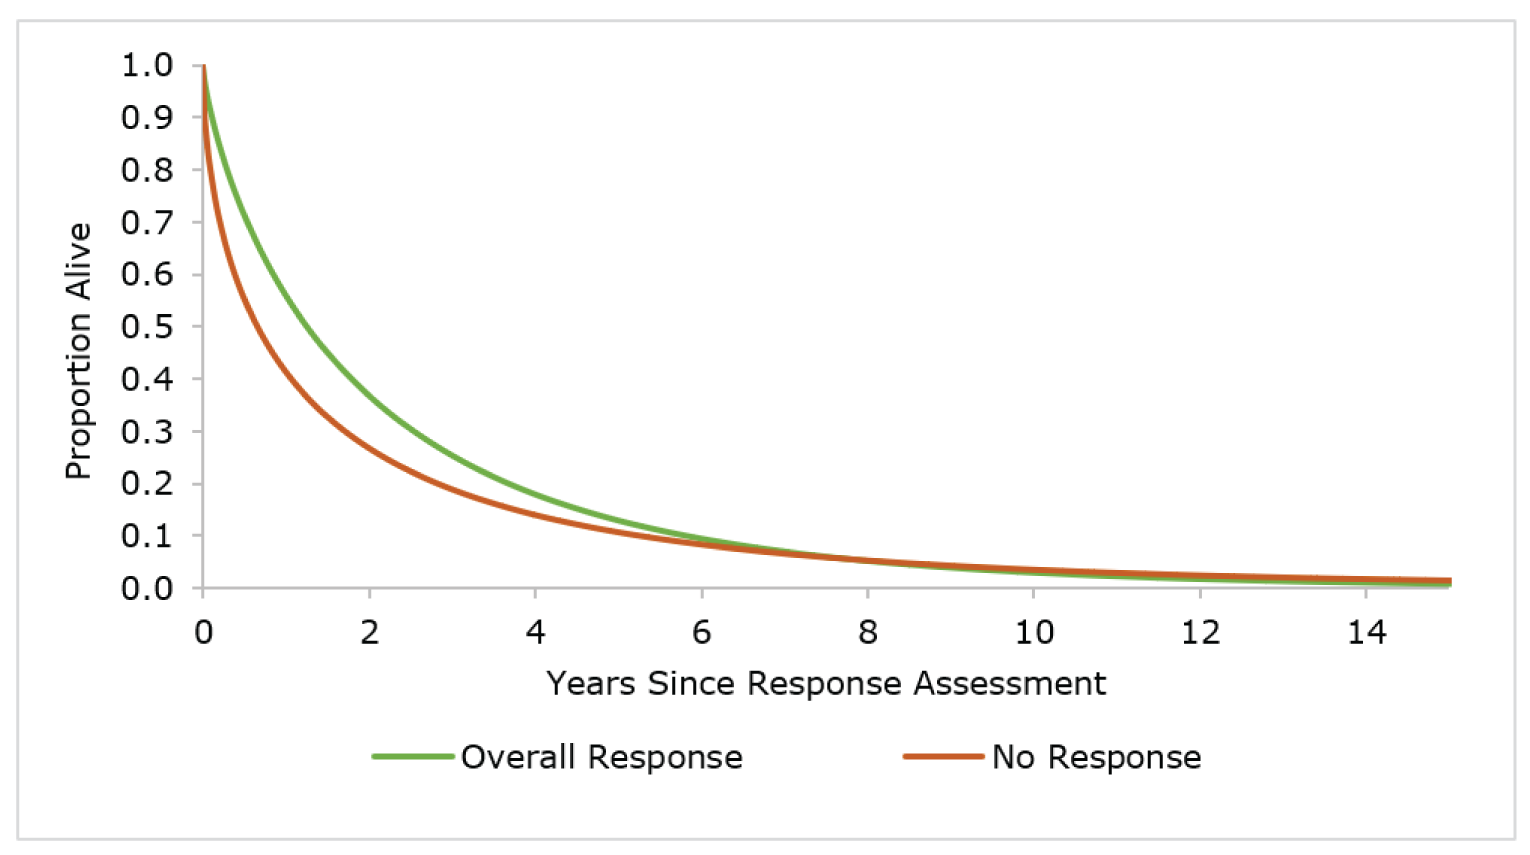 Line chart with the proportion alive on the Y axis (0.0 to 1.0) and years since response assessment on the X axis (0 to 14). Plotted are Overall Response and No Response, and show after 6 years the curves converge.